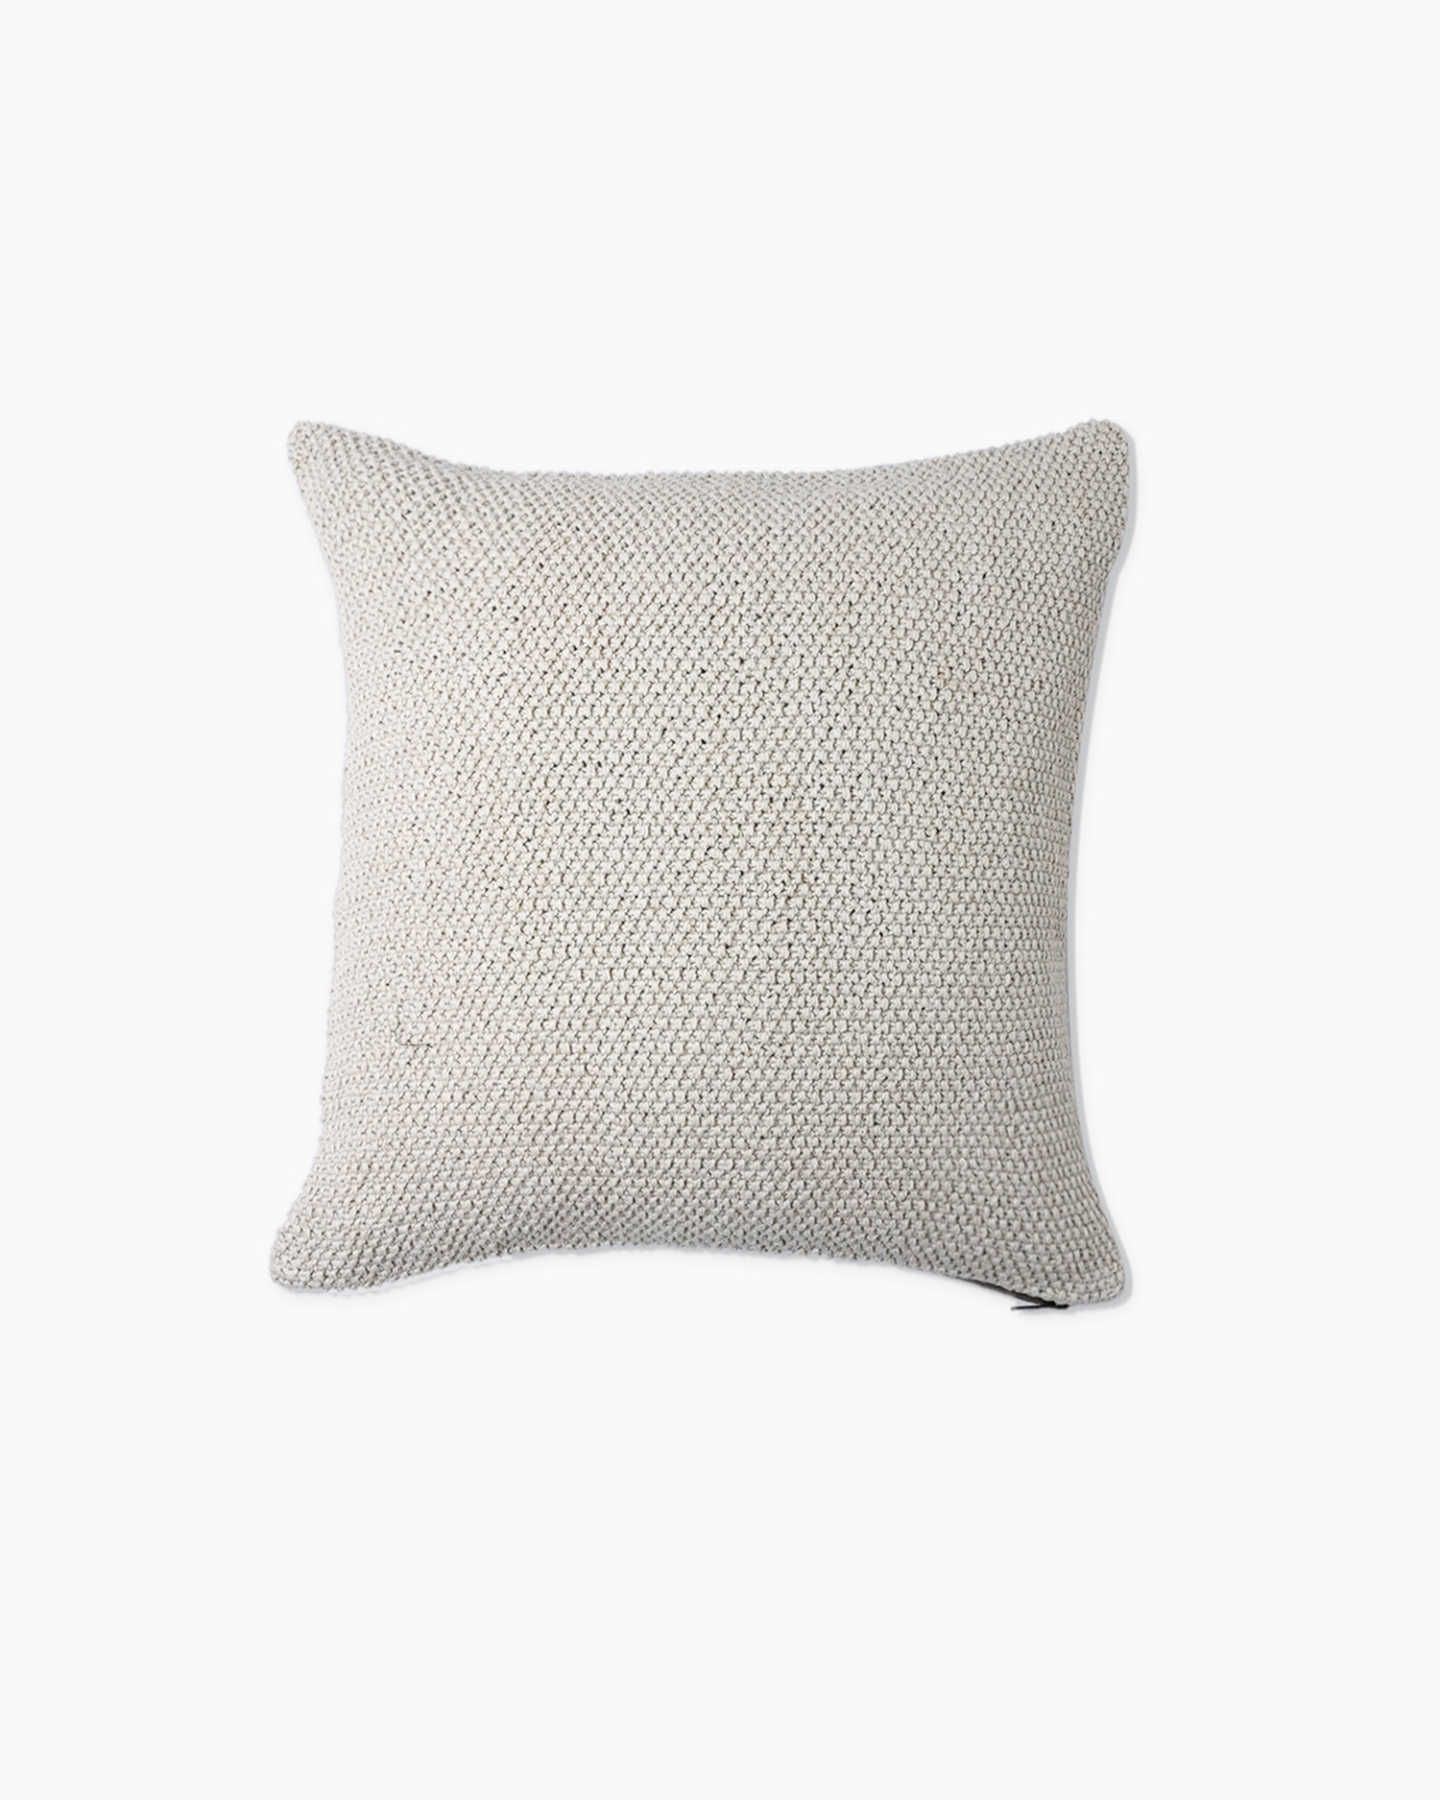 Pair With - Textured Cotton Pillow Cover - Natural